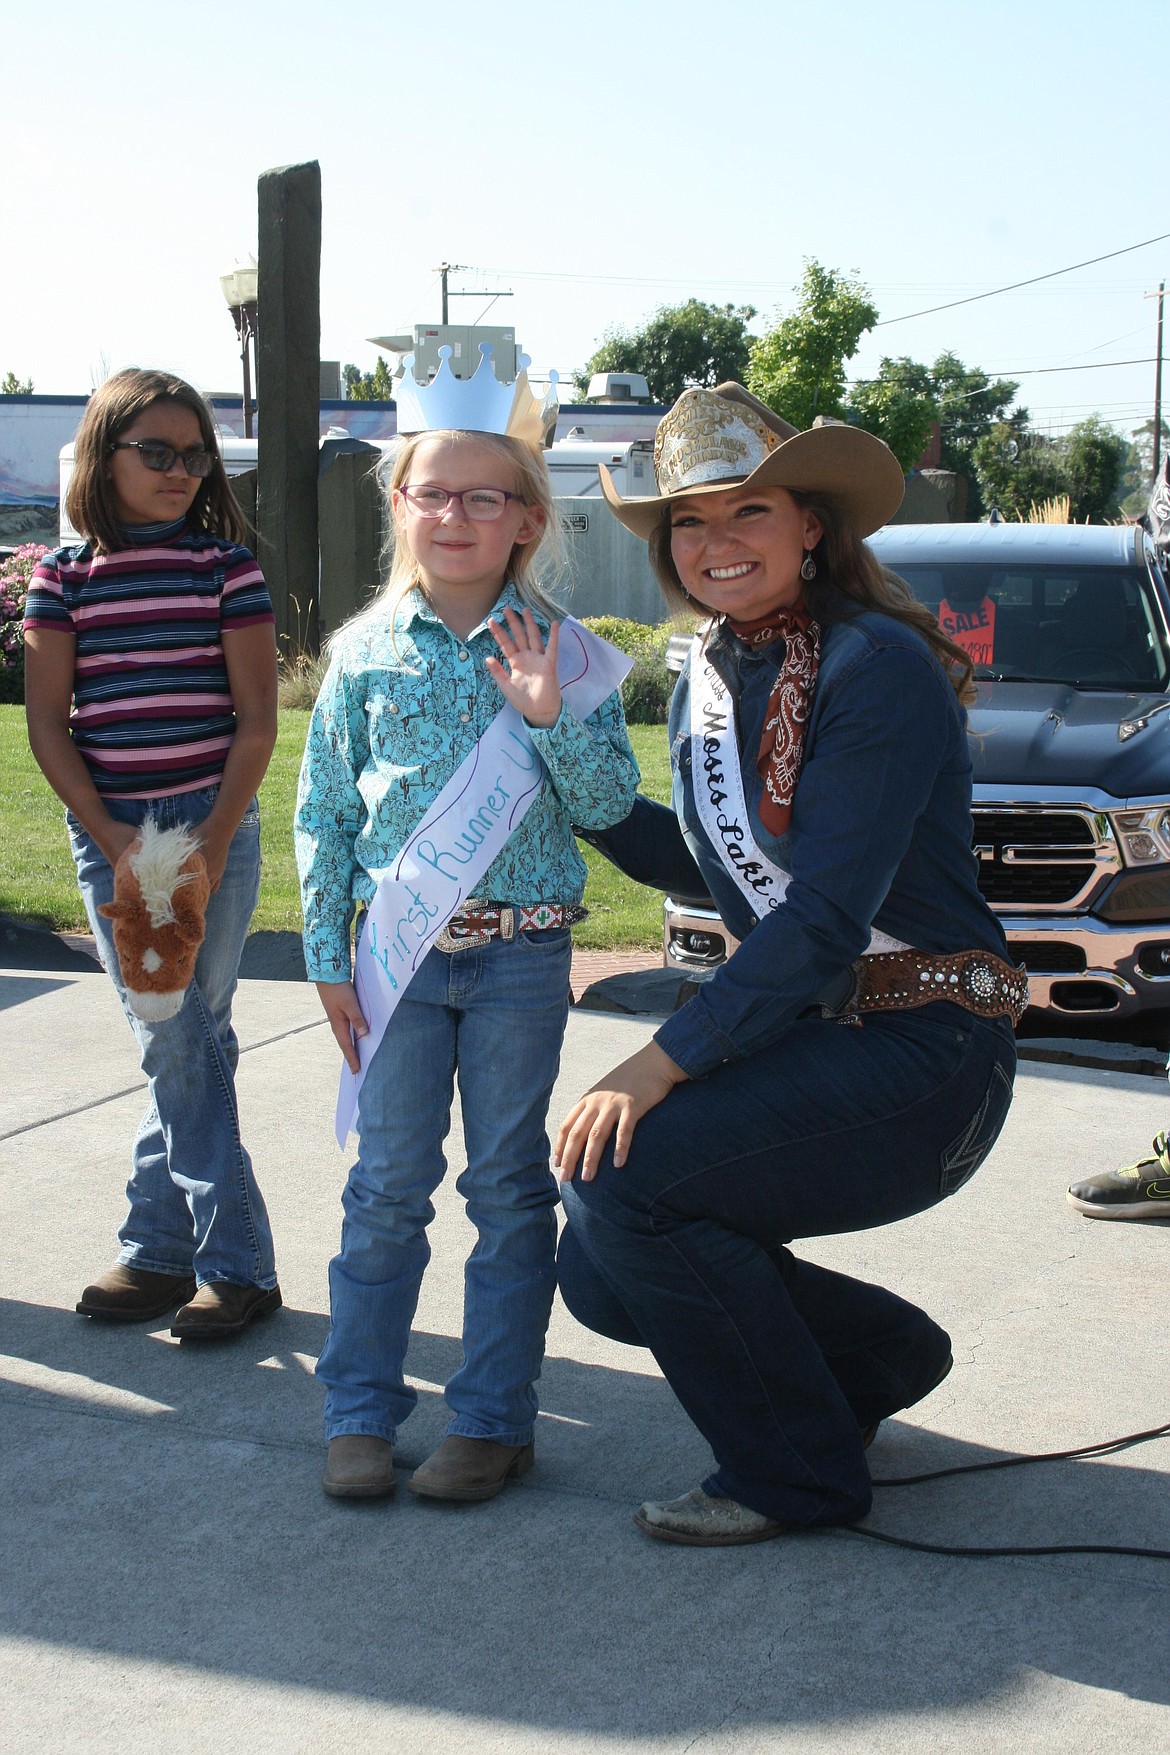 Madelyn Lewison receives the first runner-up crown at the Pee Wee Stampede queen contest, presented by Miss Moses Lake Roundup Brianna Kin Kade.